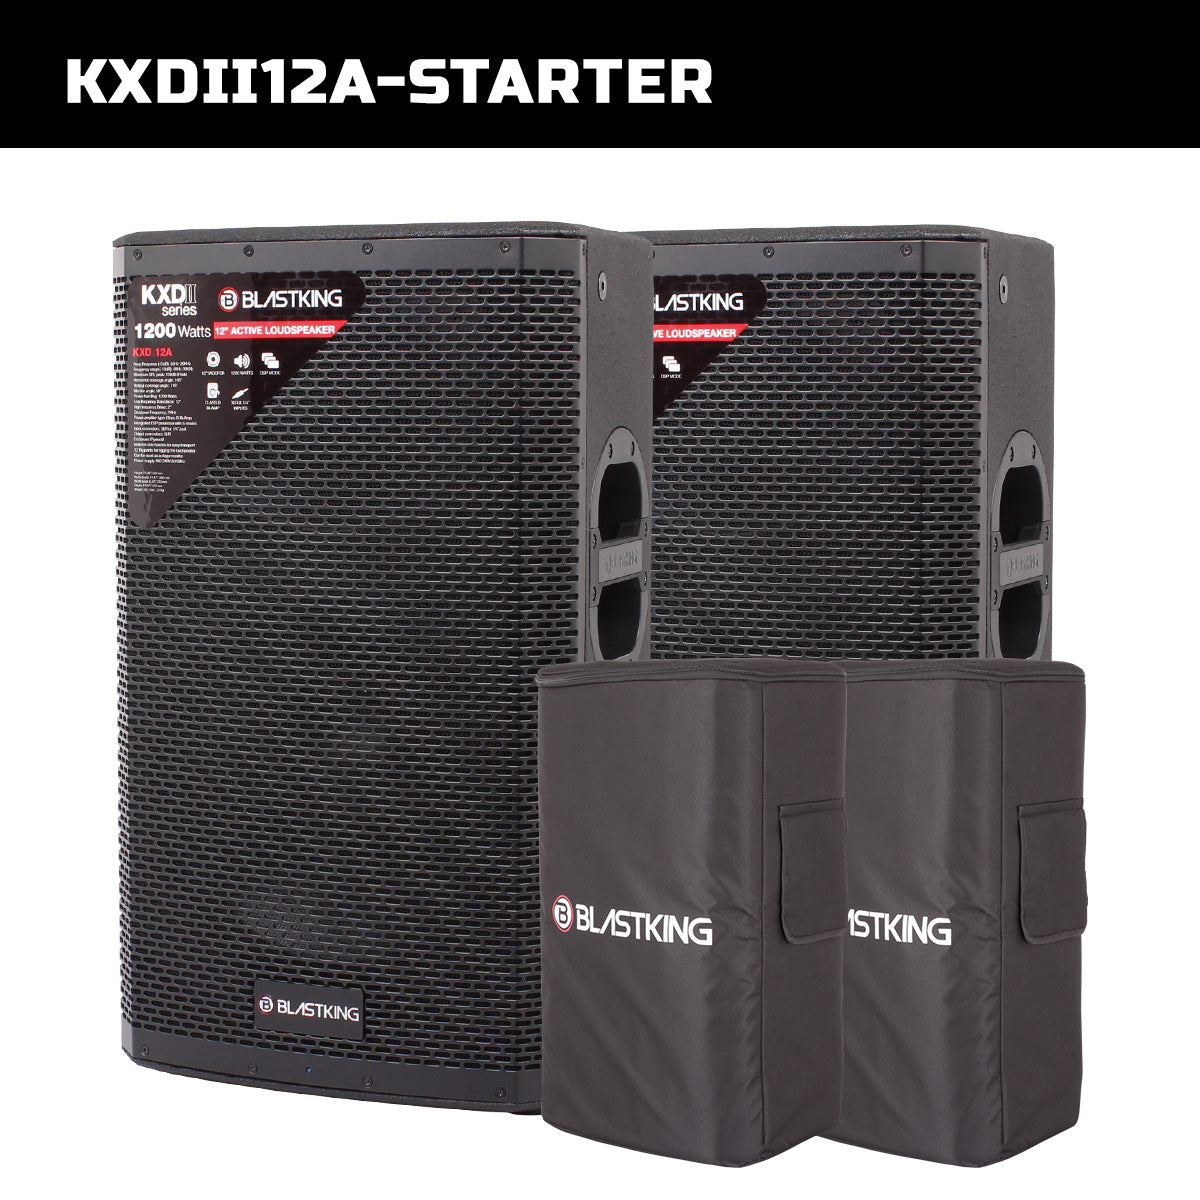 Blastking KXDII12A-STARTER (2) 12” Active Loudspeakers 1200 Watts Class-D Bi Amp DSP Mode with Bags